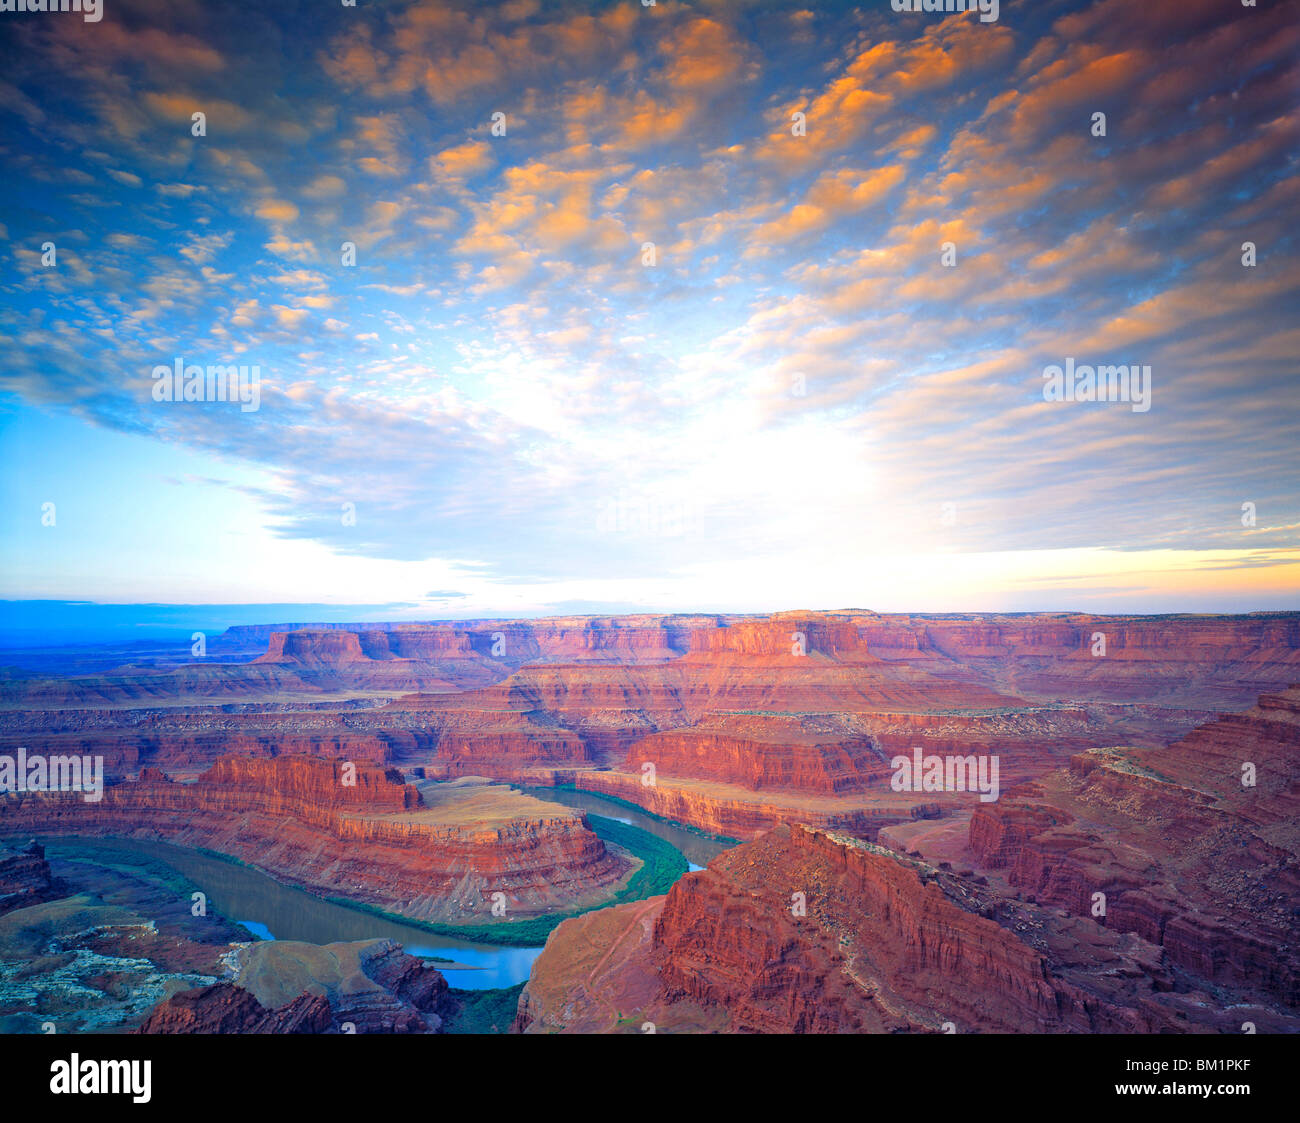 Dead Horse Point and Clouds  View of Canyonlands National Park  Colorado River  Dead Horse Point State Park  Utah Stock Photo